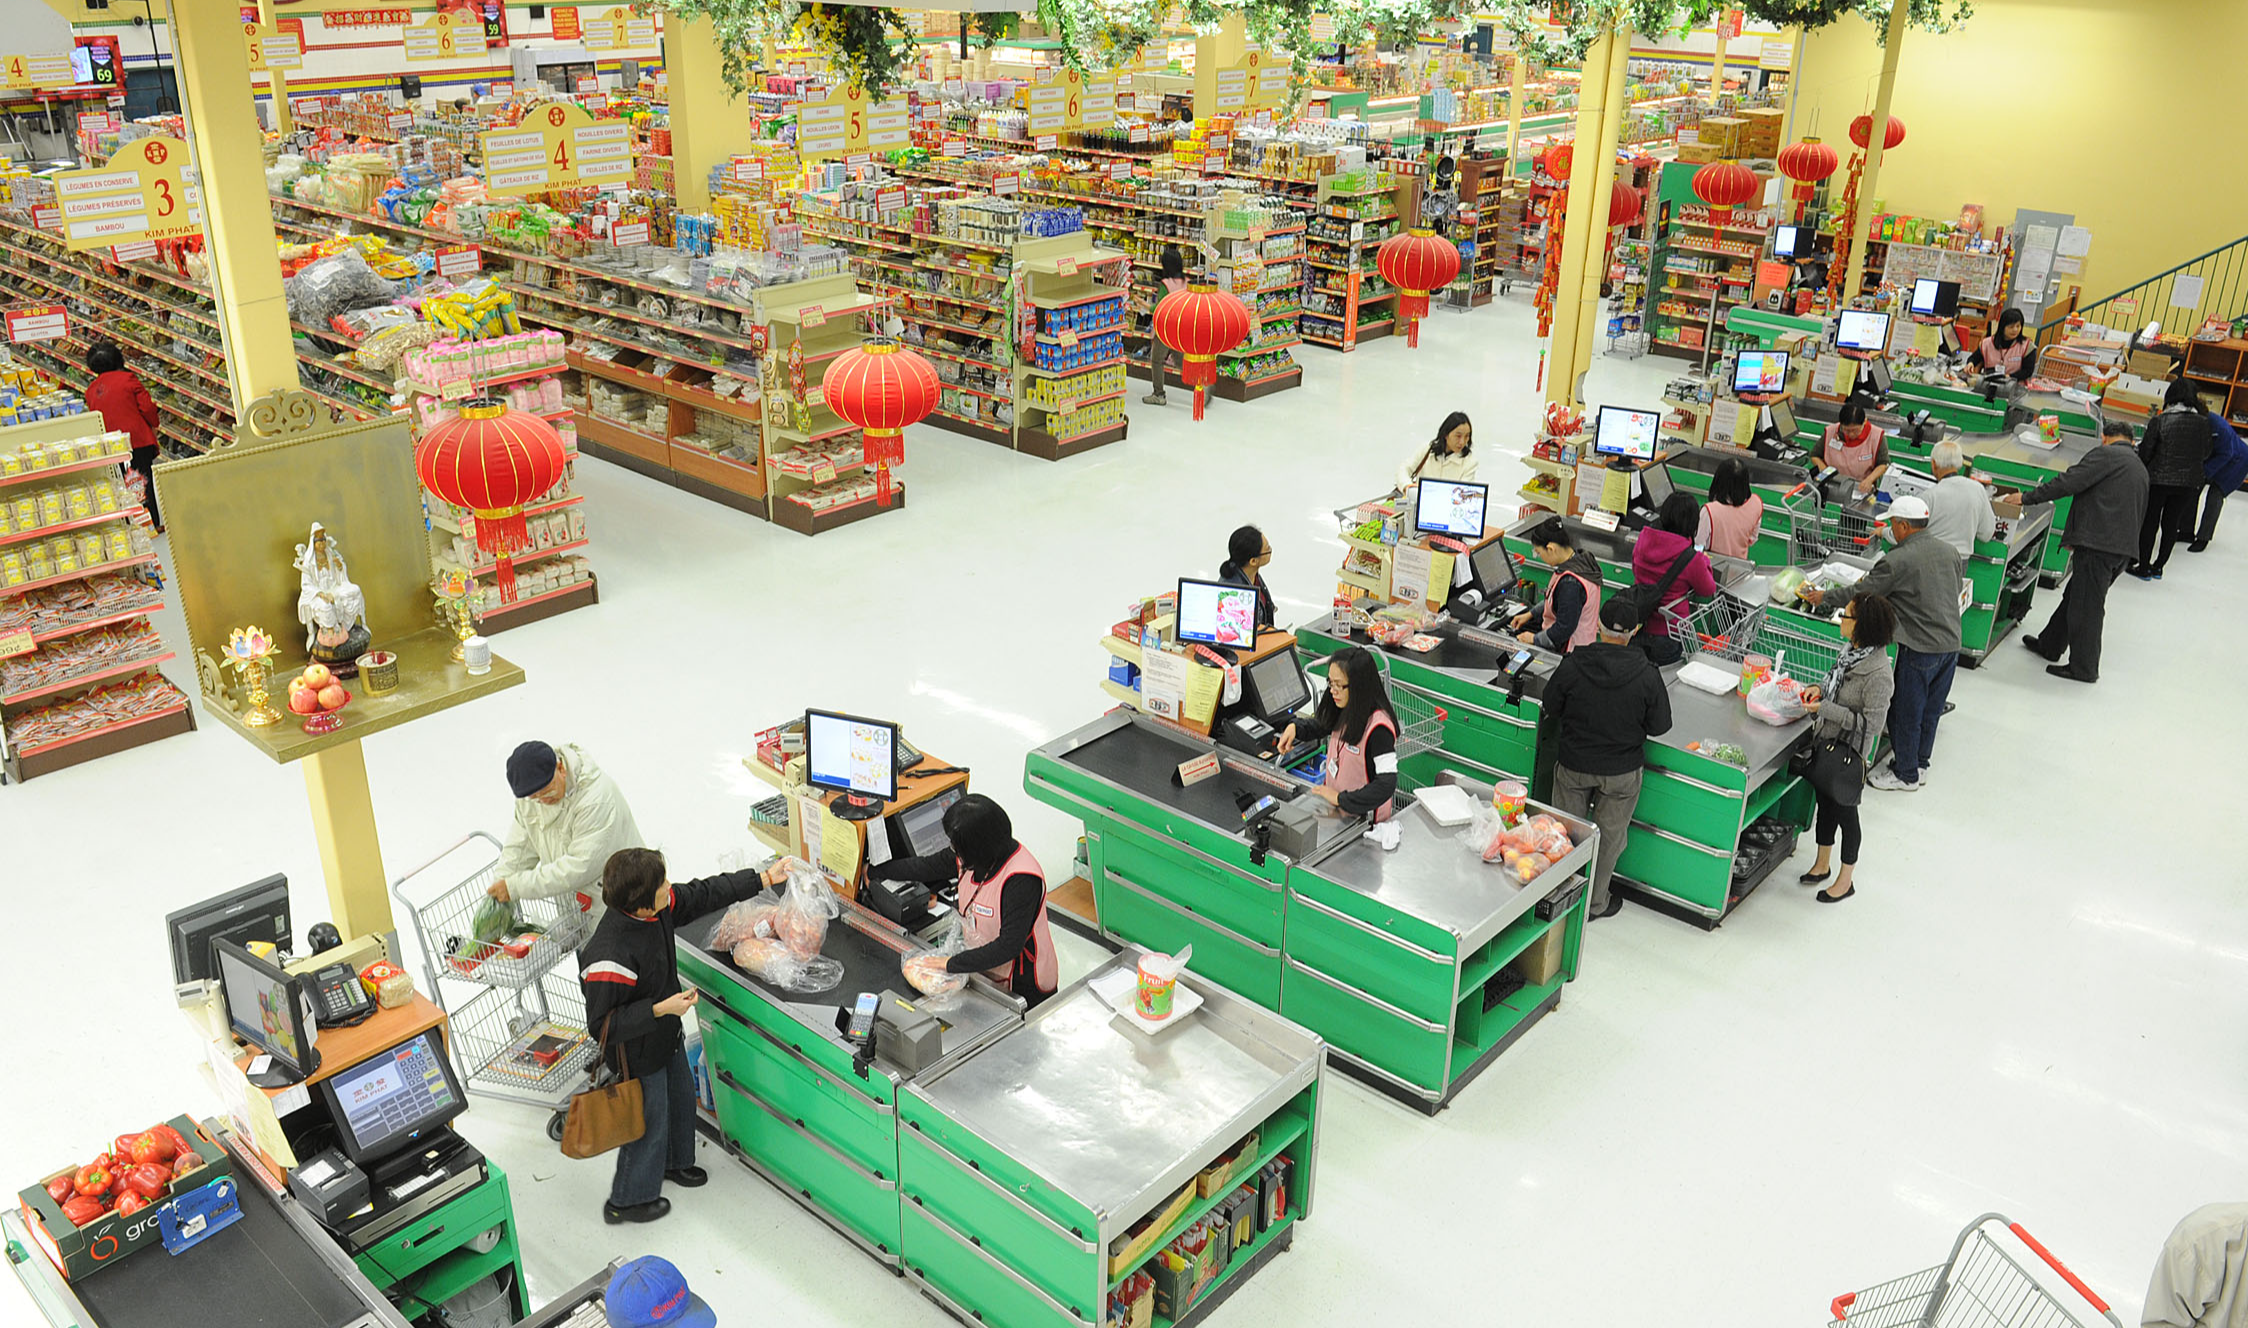 Bird’s-eye view of inside the grocery store